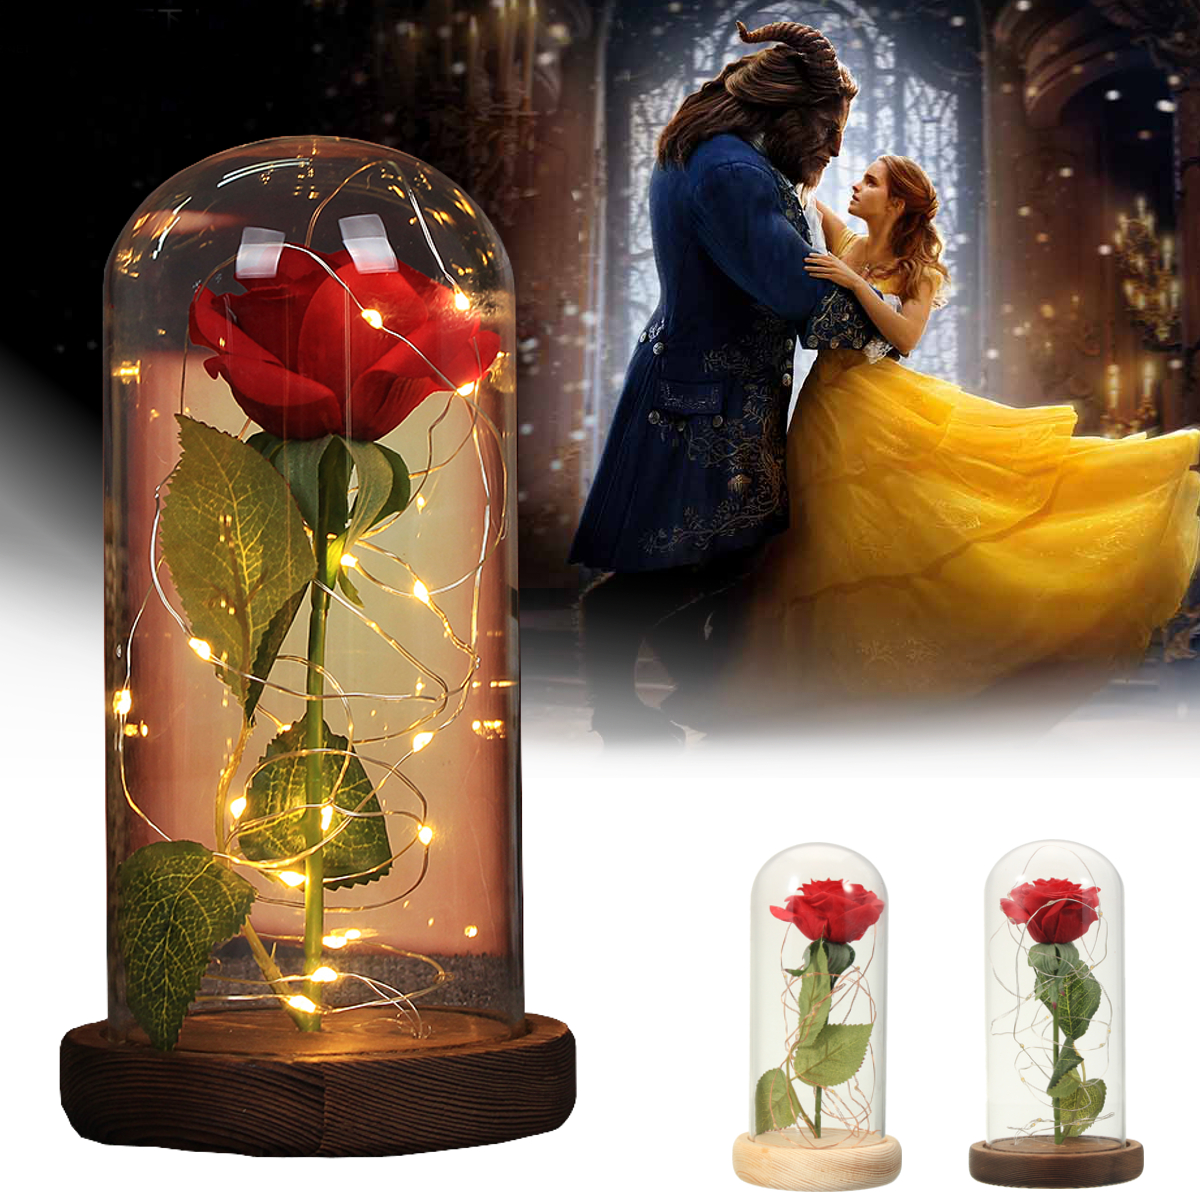 Red-Rose-Lights-Decorations-Beauty-Enchanted-Preserved-Red-Fresh-Rose-Glass-Cover-with-LED-Light-1256507-2